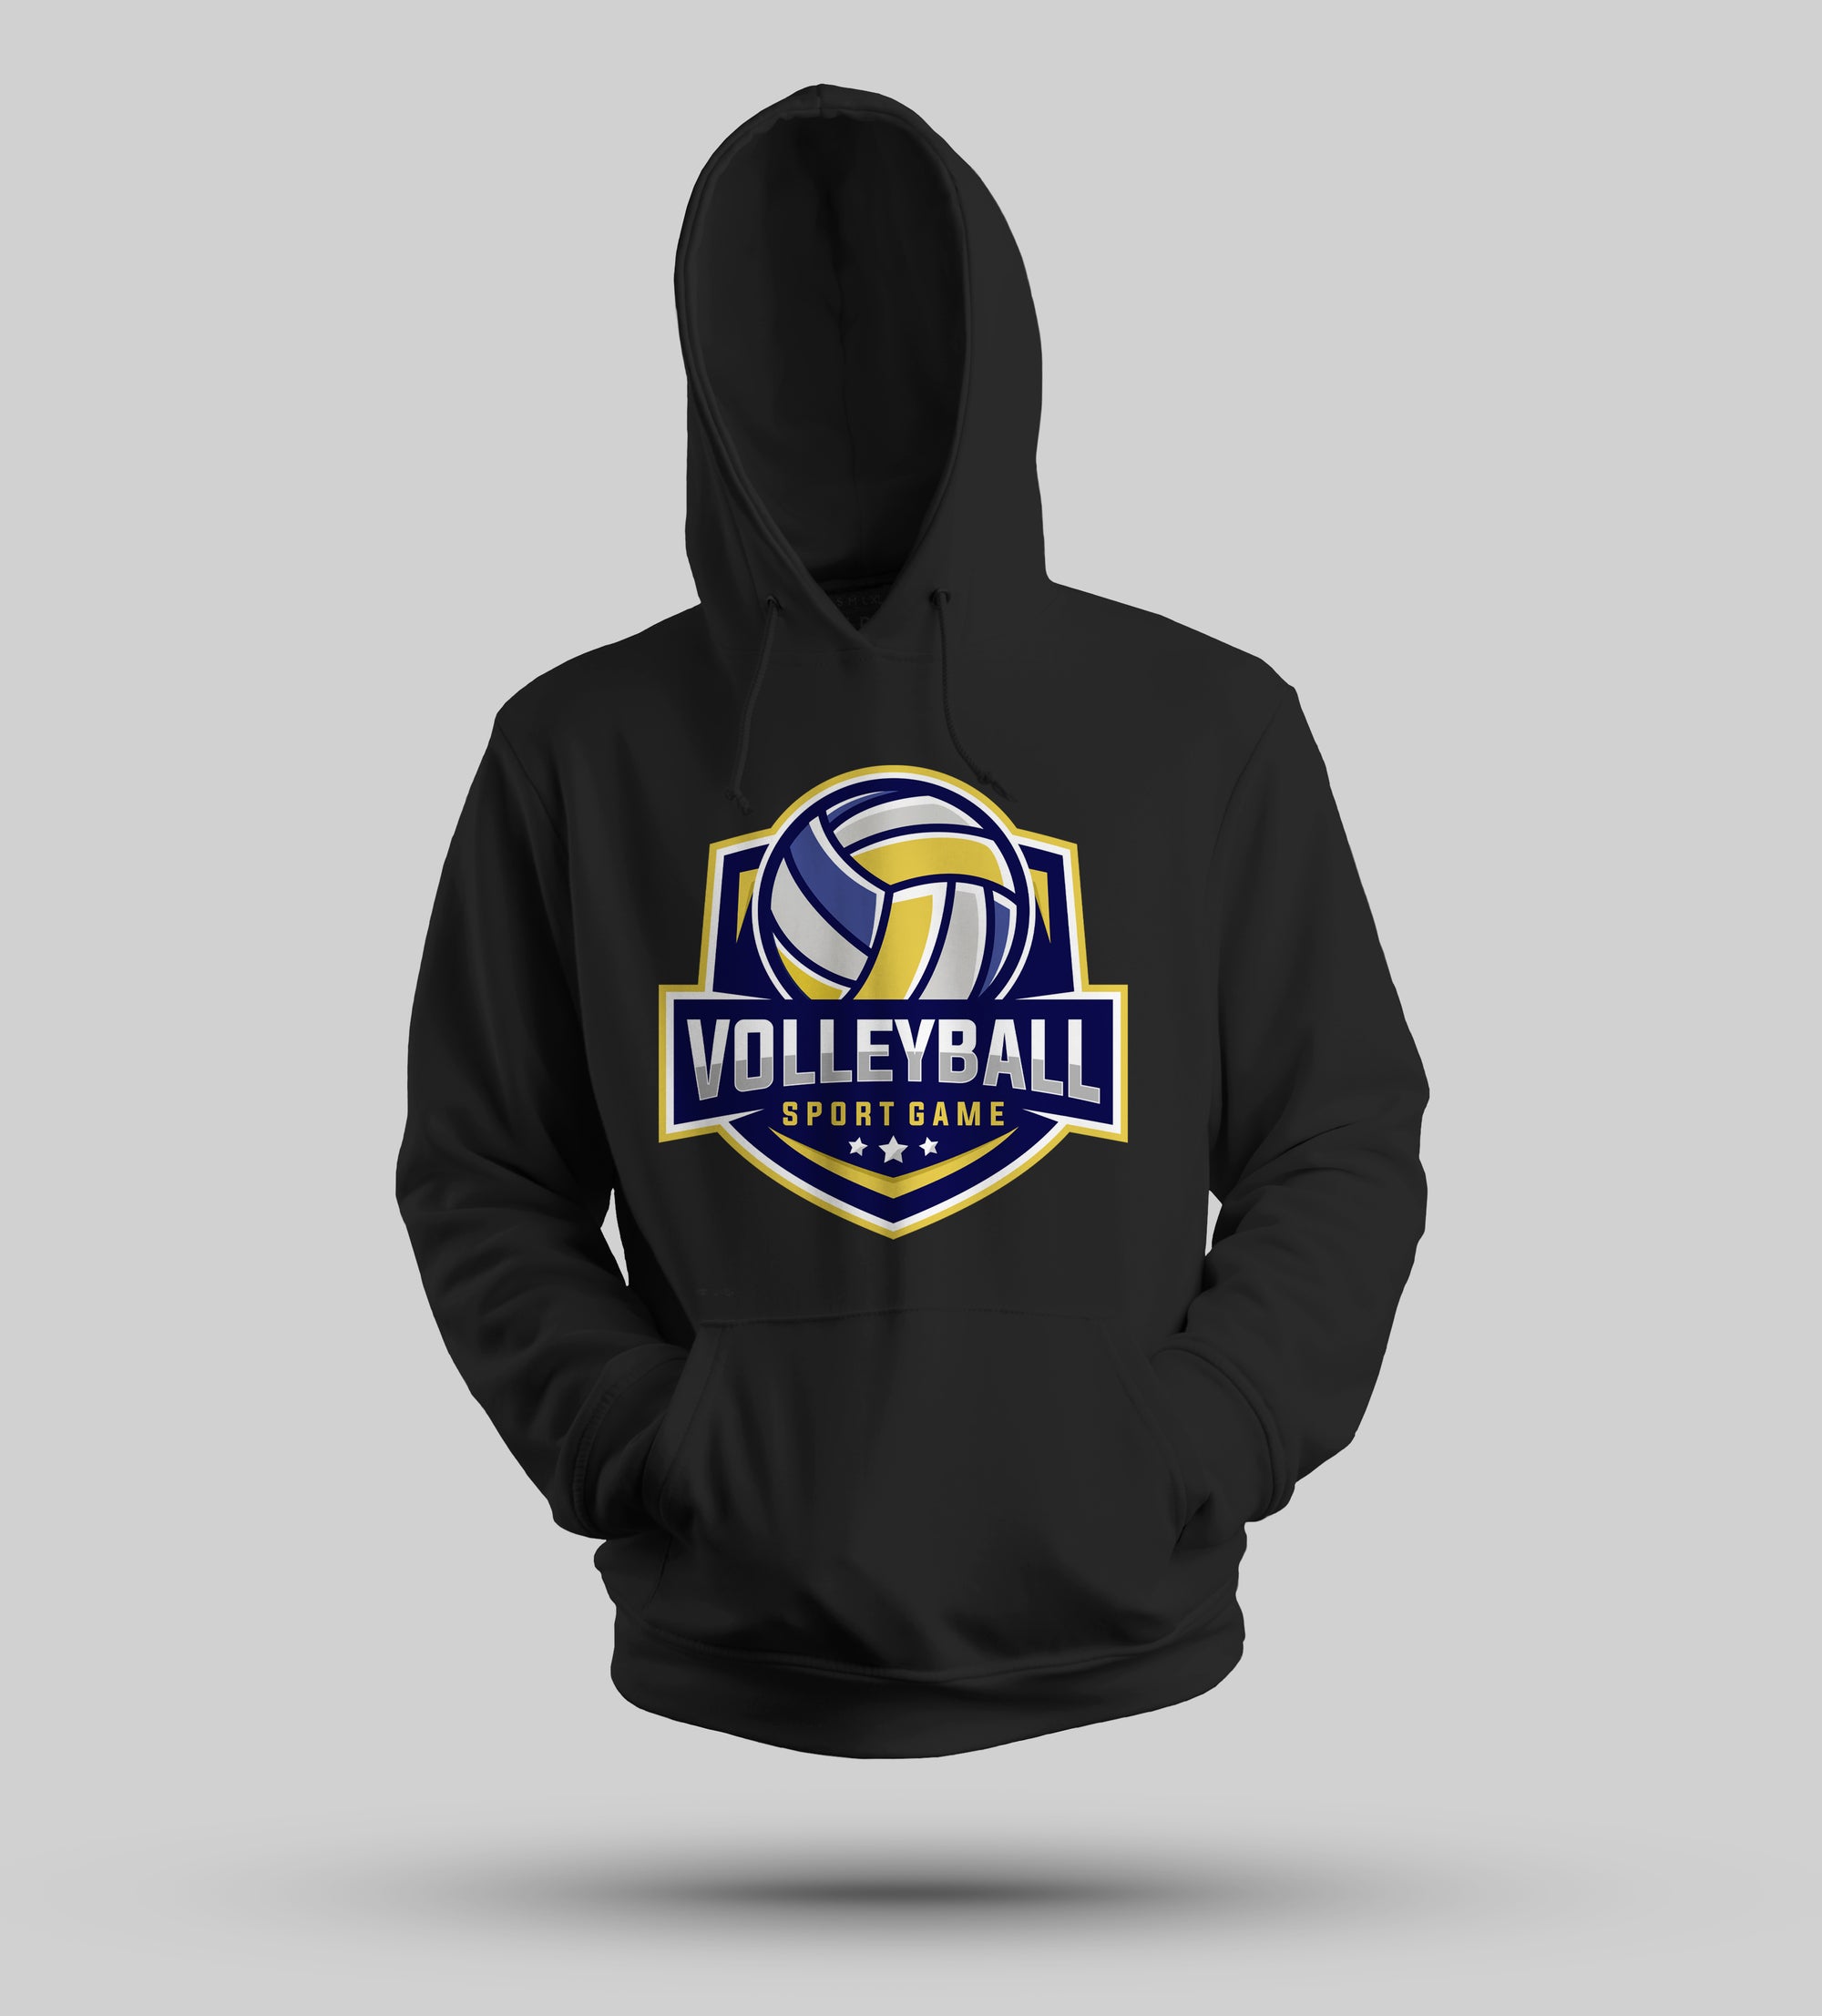 Ace Player Volleyball Hoodie